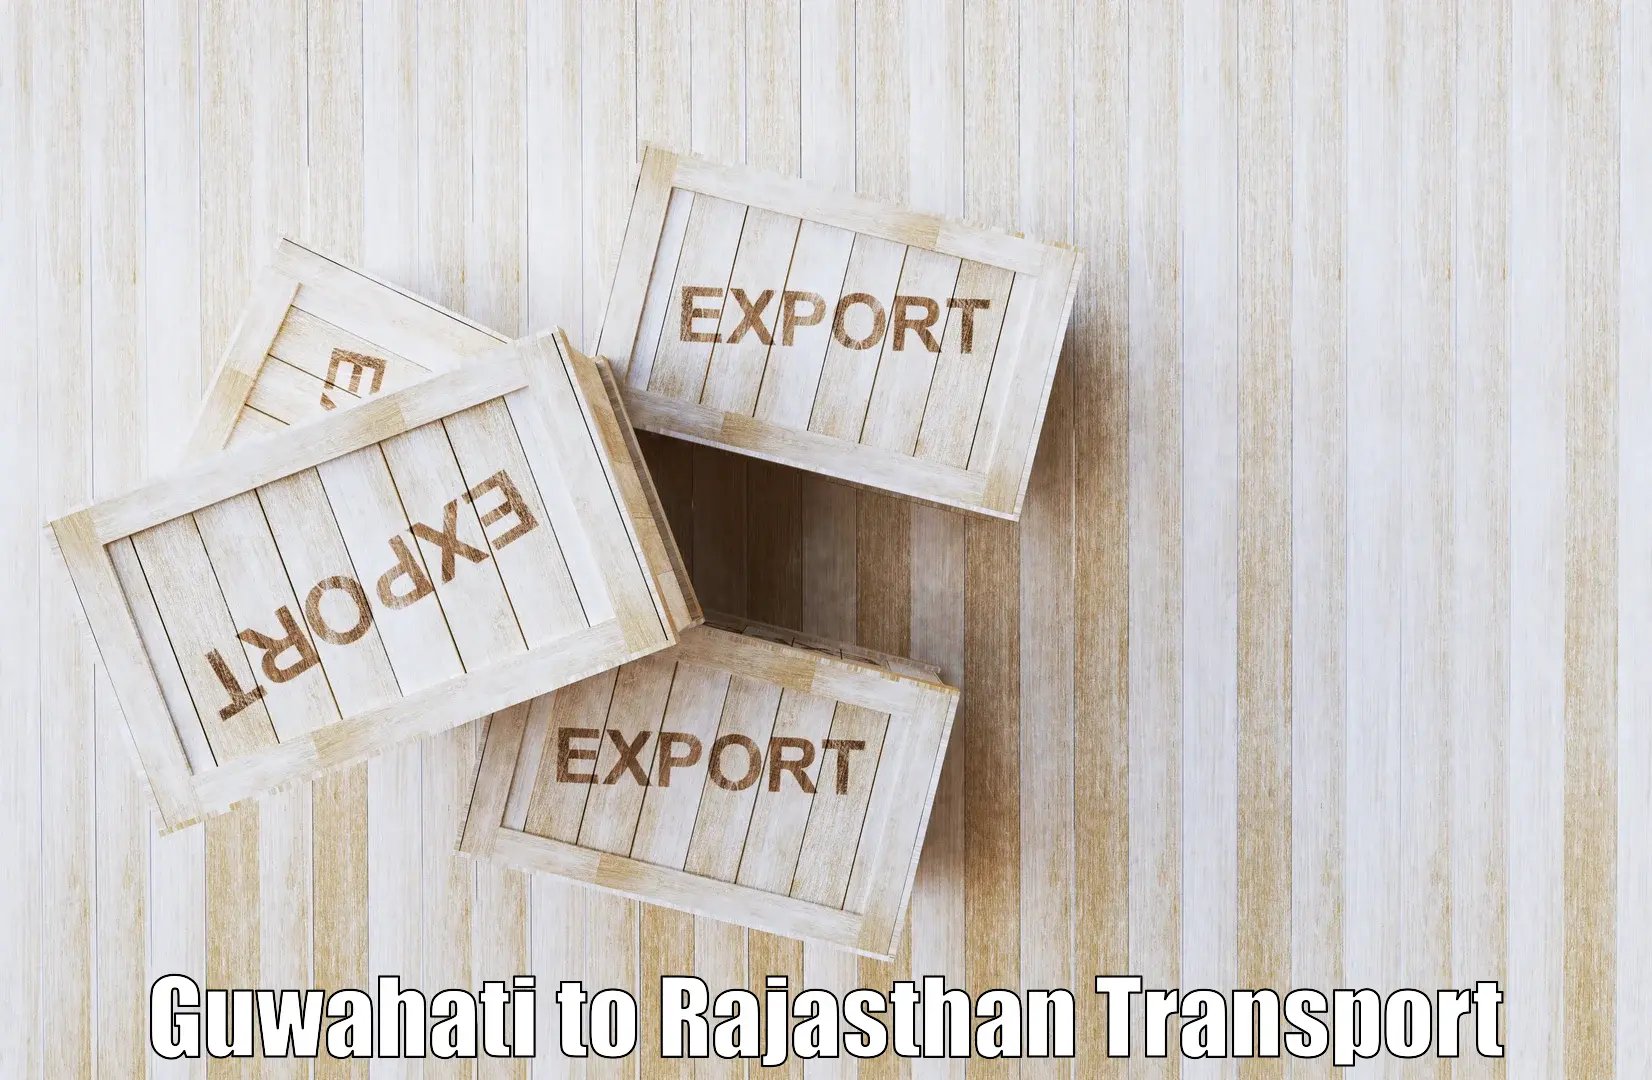 Express transport services in Guwahati to Yeswanthapur